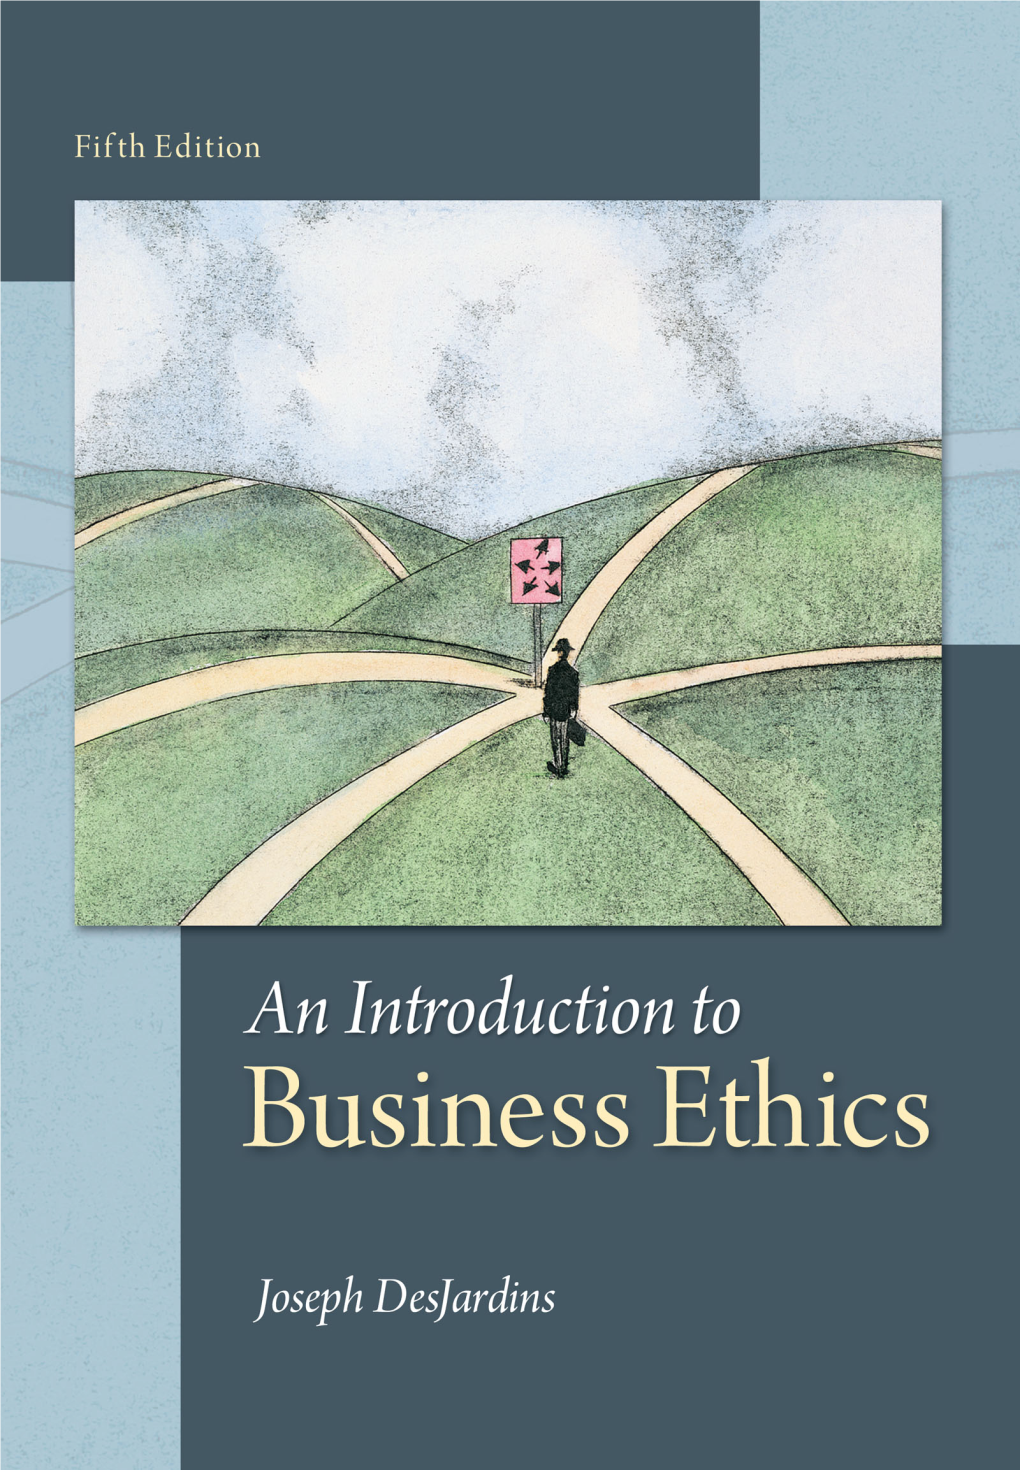 An Introduction to Business Ethics, Fifth Edition